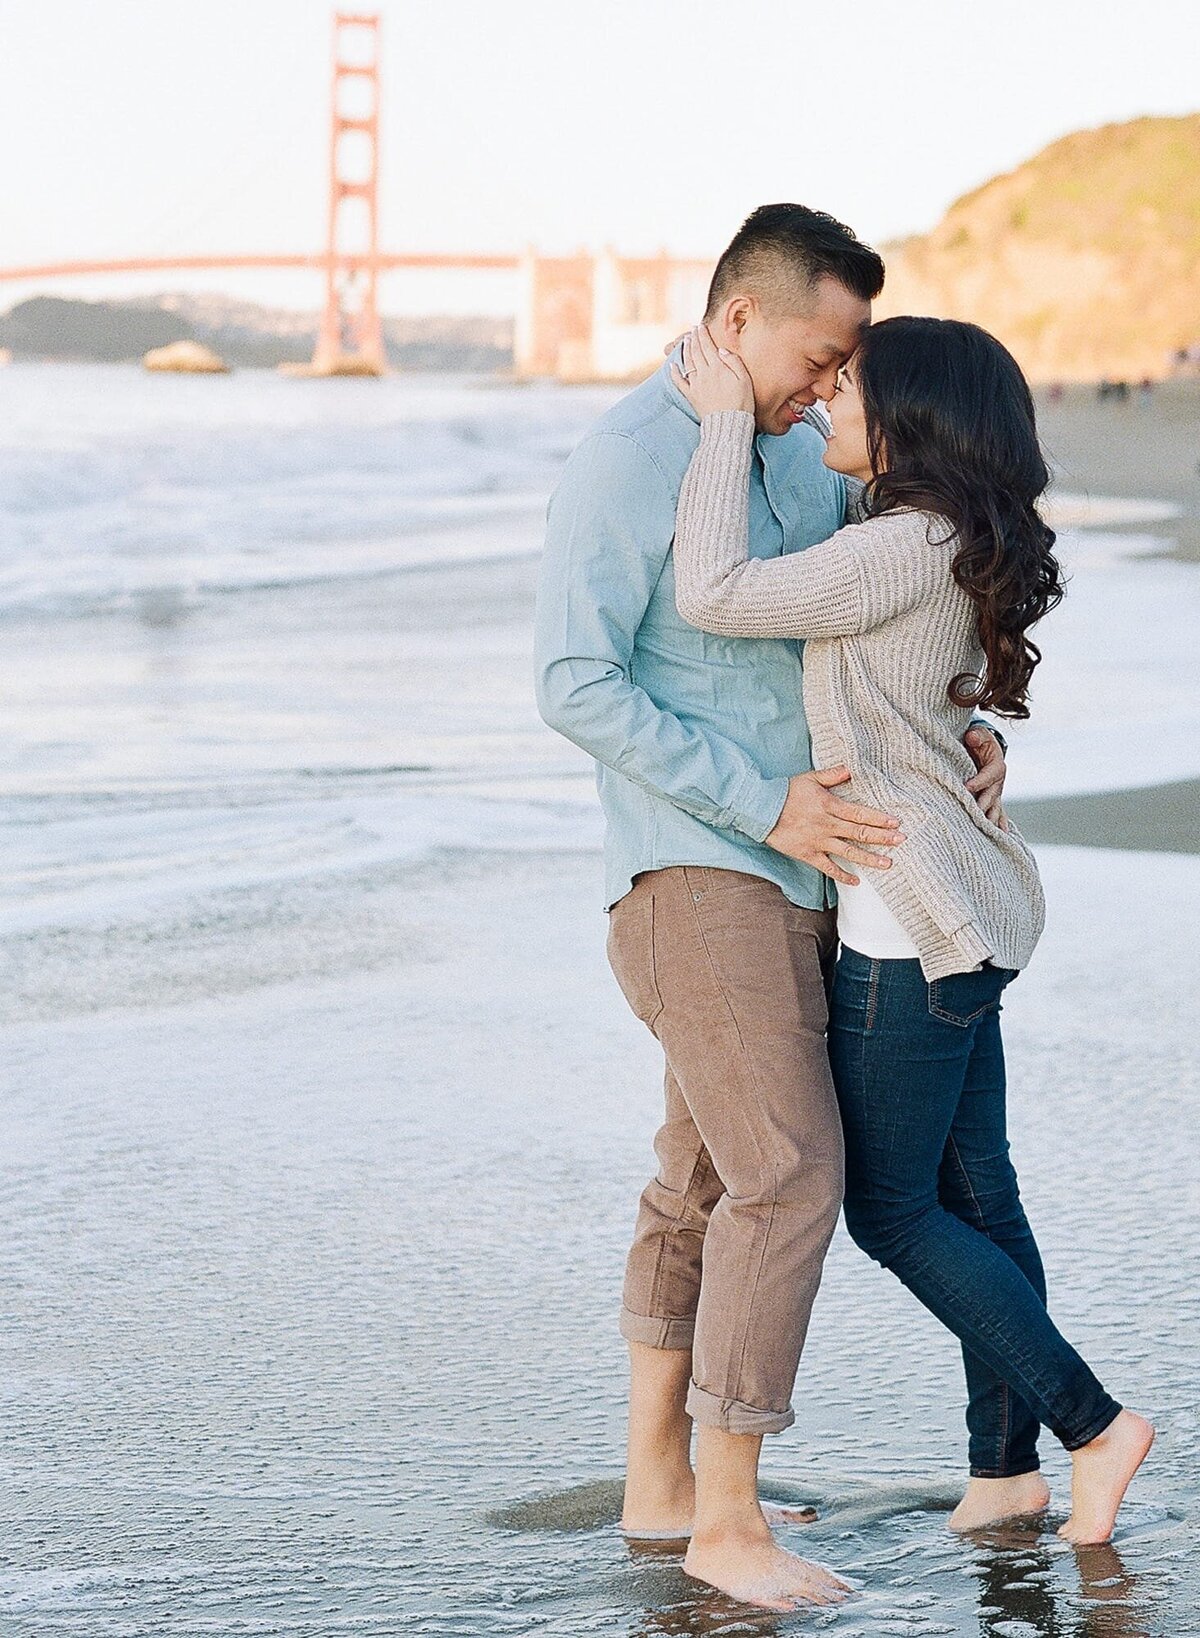 San Francisco engagement photographer Robin Jolin captures a newly engaged couple at the Baker Beach with the Golden Gate Bride in the backdrop.